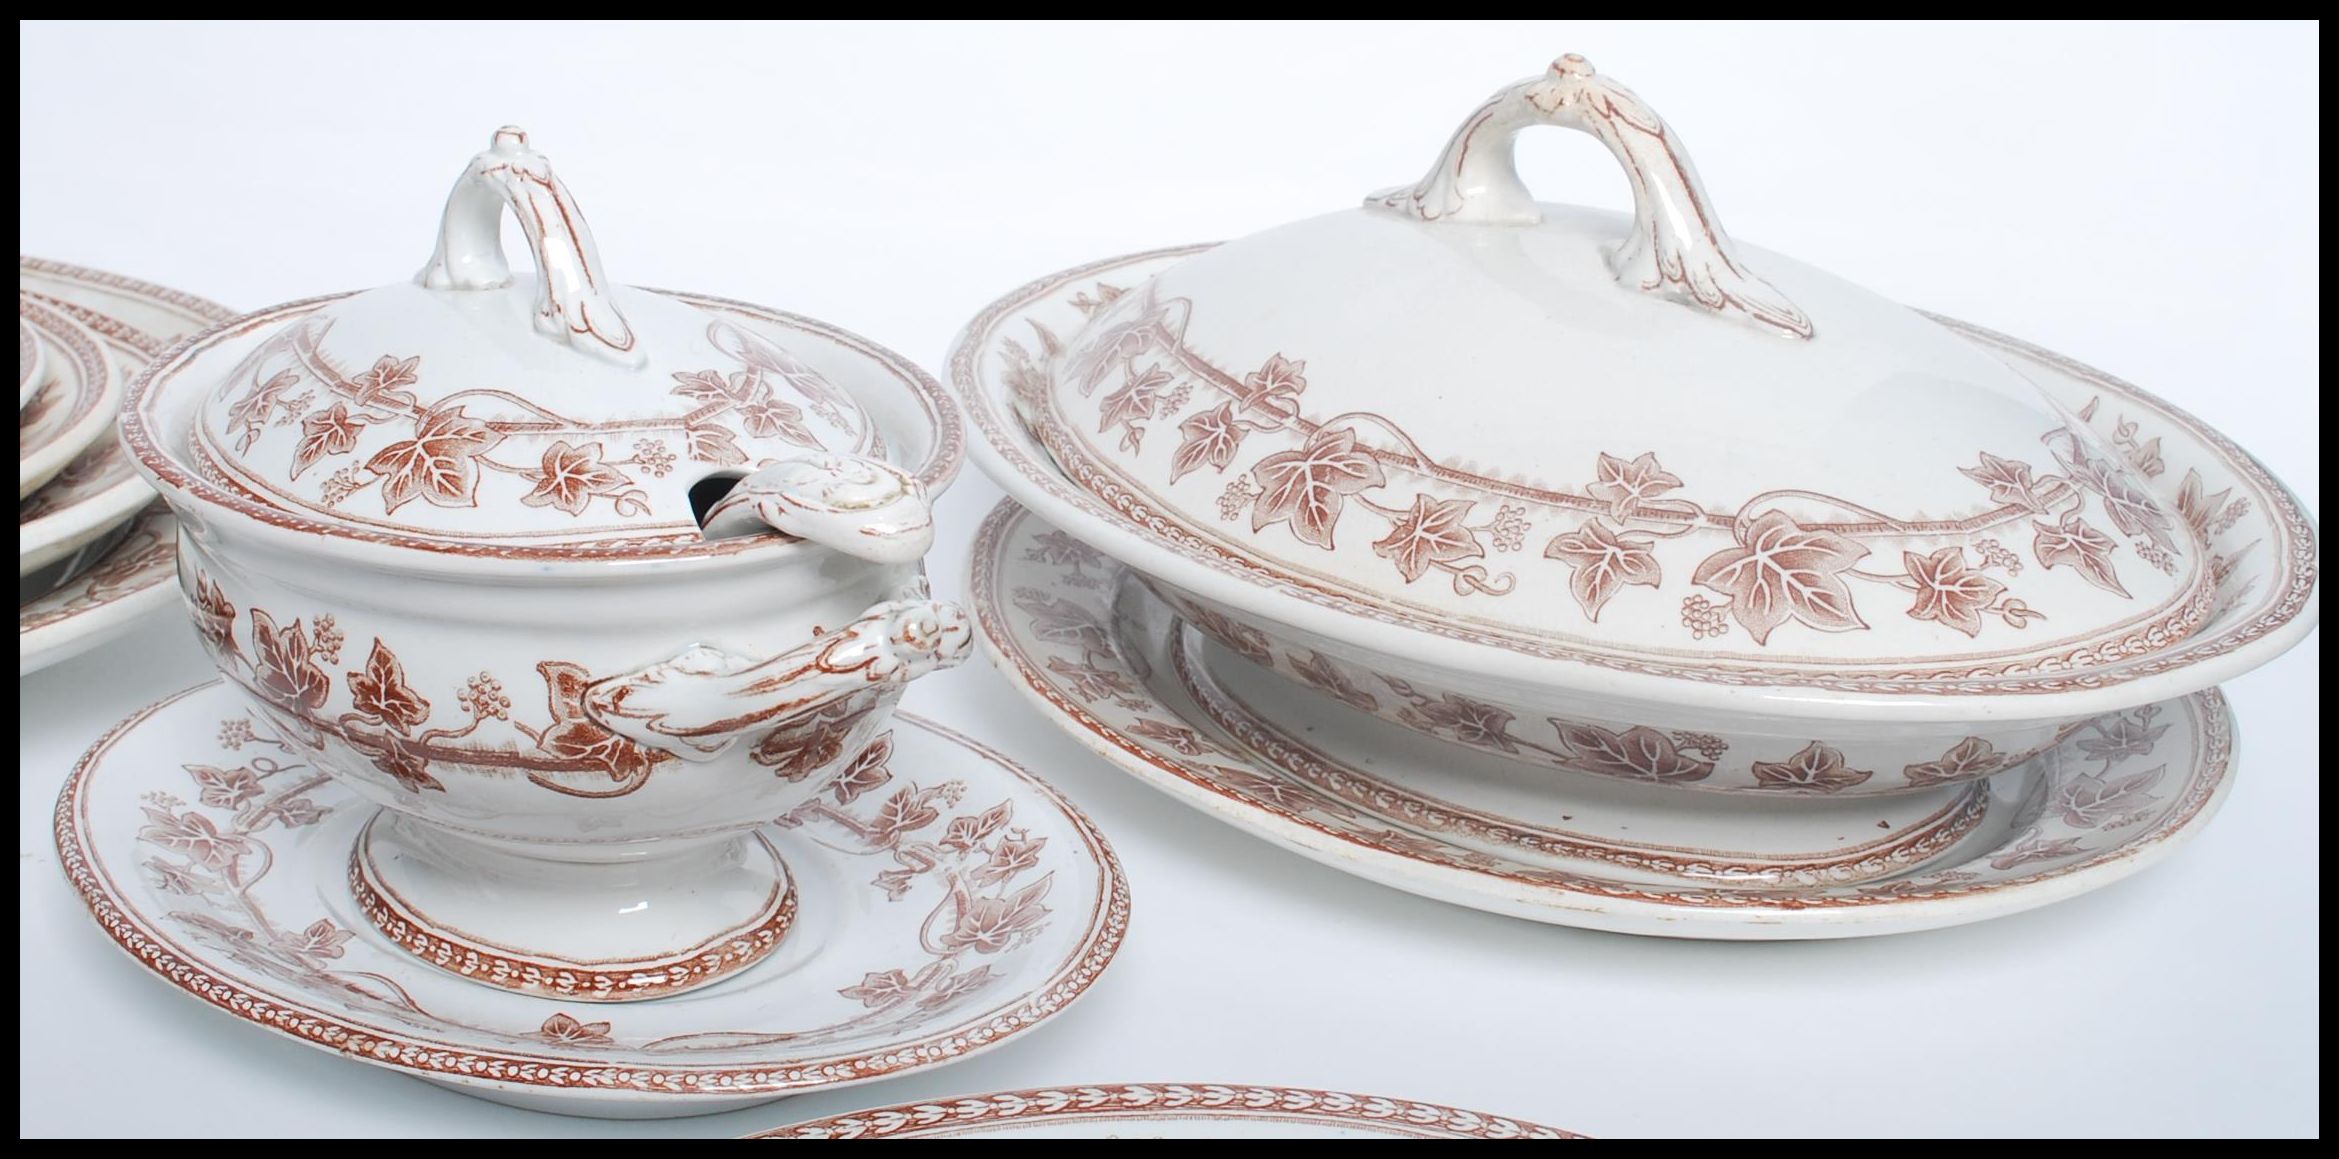 A 19th century Victorian Wedgwood Ivy pattern dinner service consisting of tureens, plates - Image 3 of 8